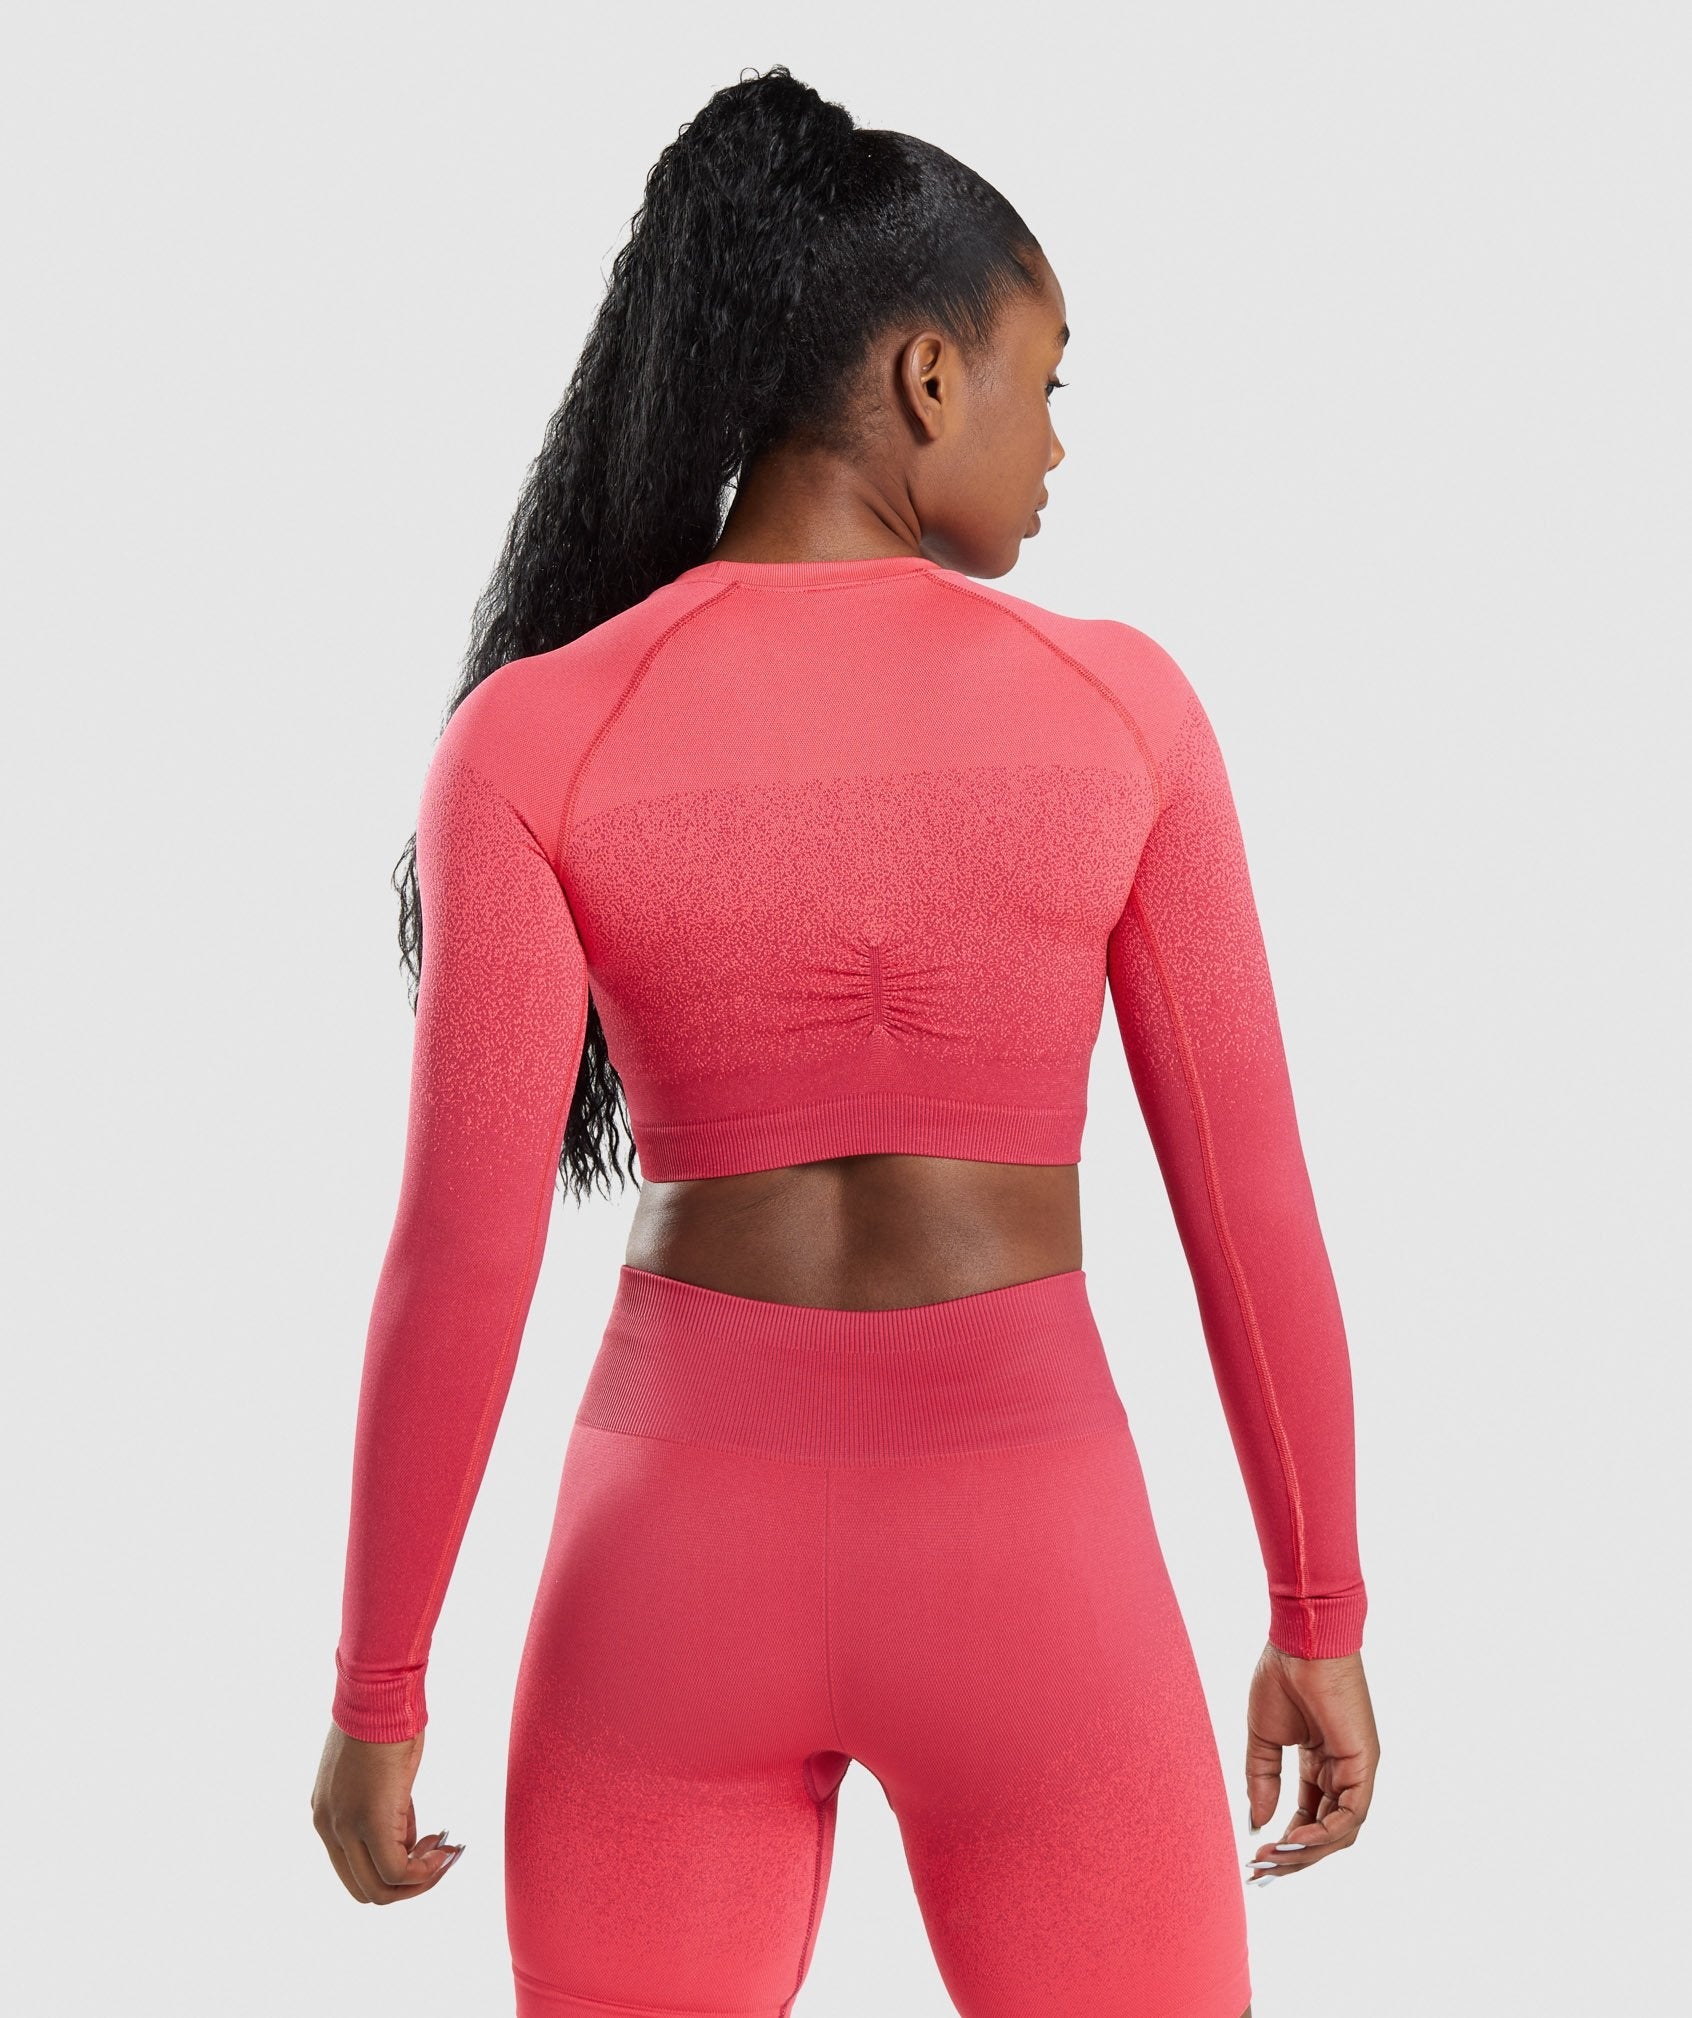 Adapt Ombre Seamless Long Sleeve Crop Top in Pink/Red